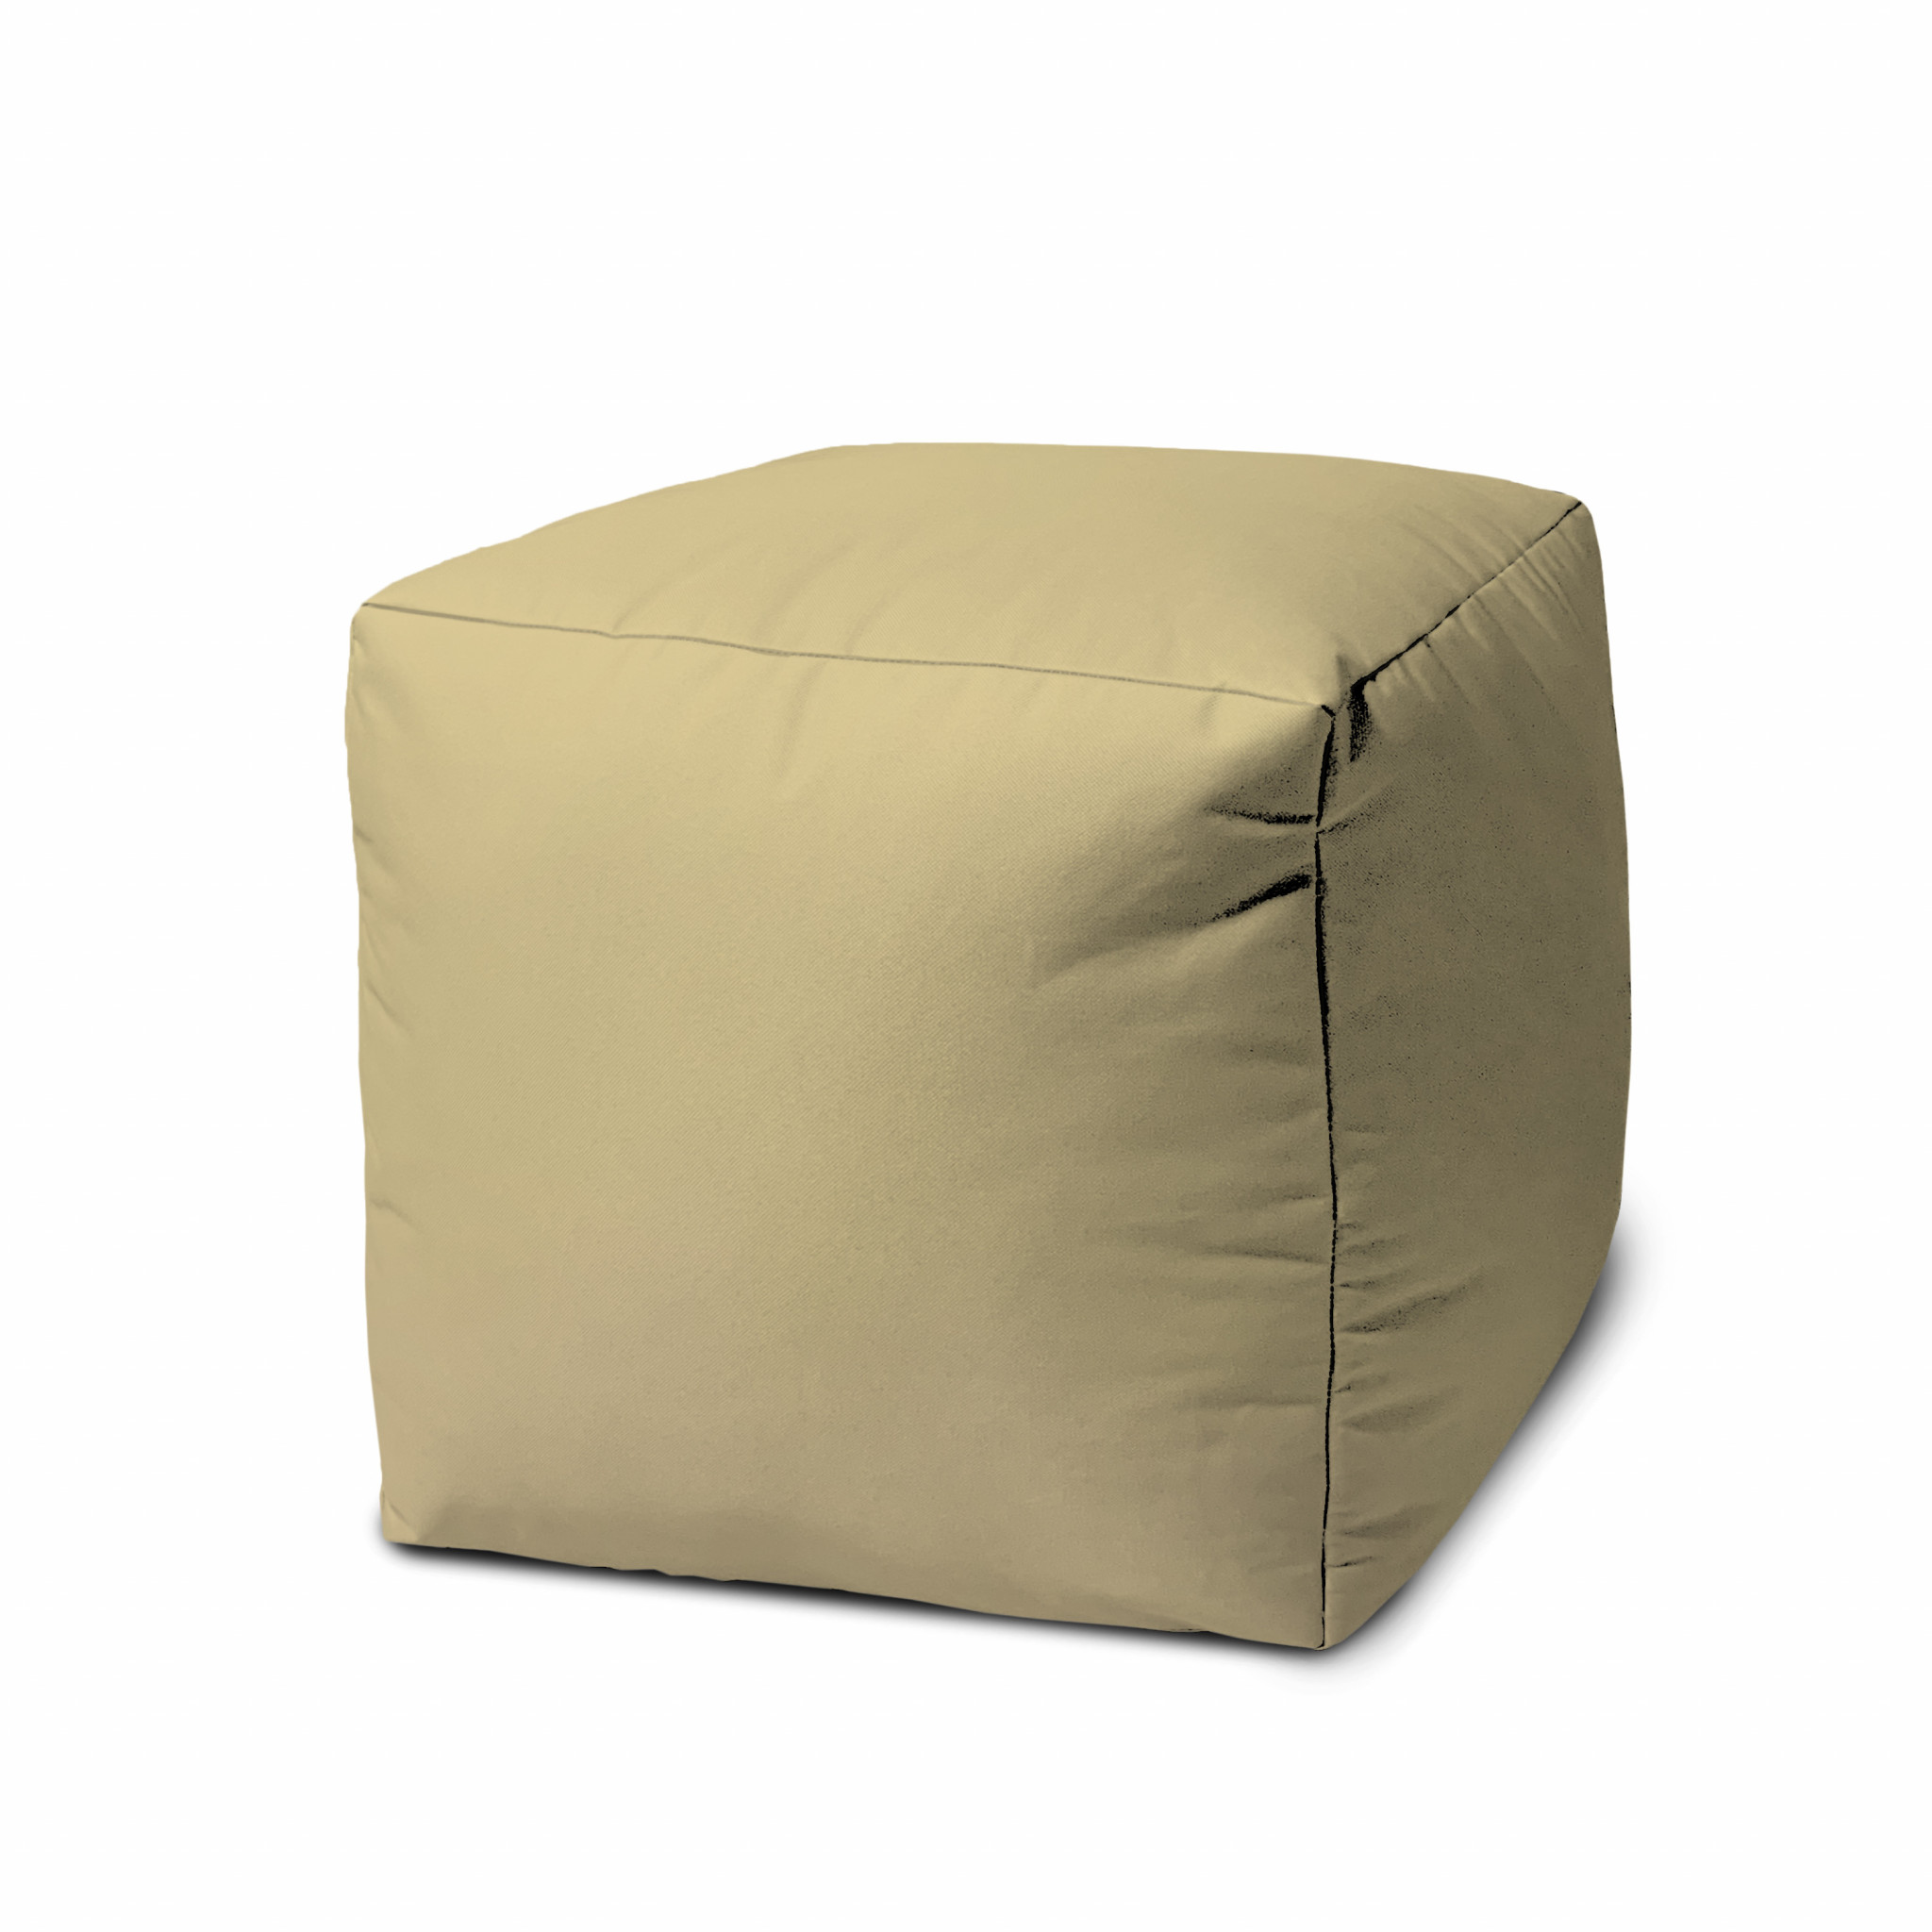 17 Cool Creamy Yellow Beige Solid Color Indoor Outdoor Pouf Cover